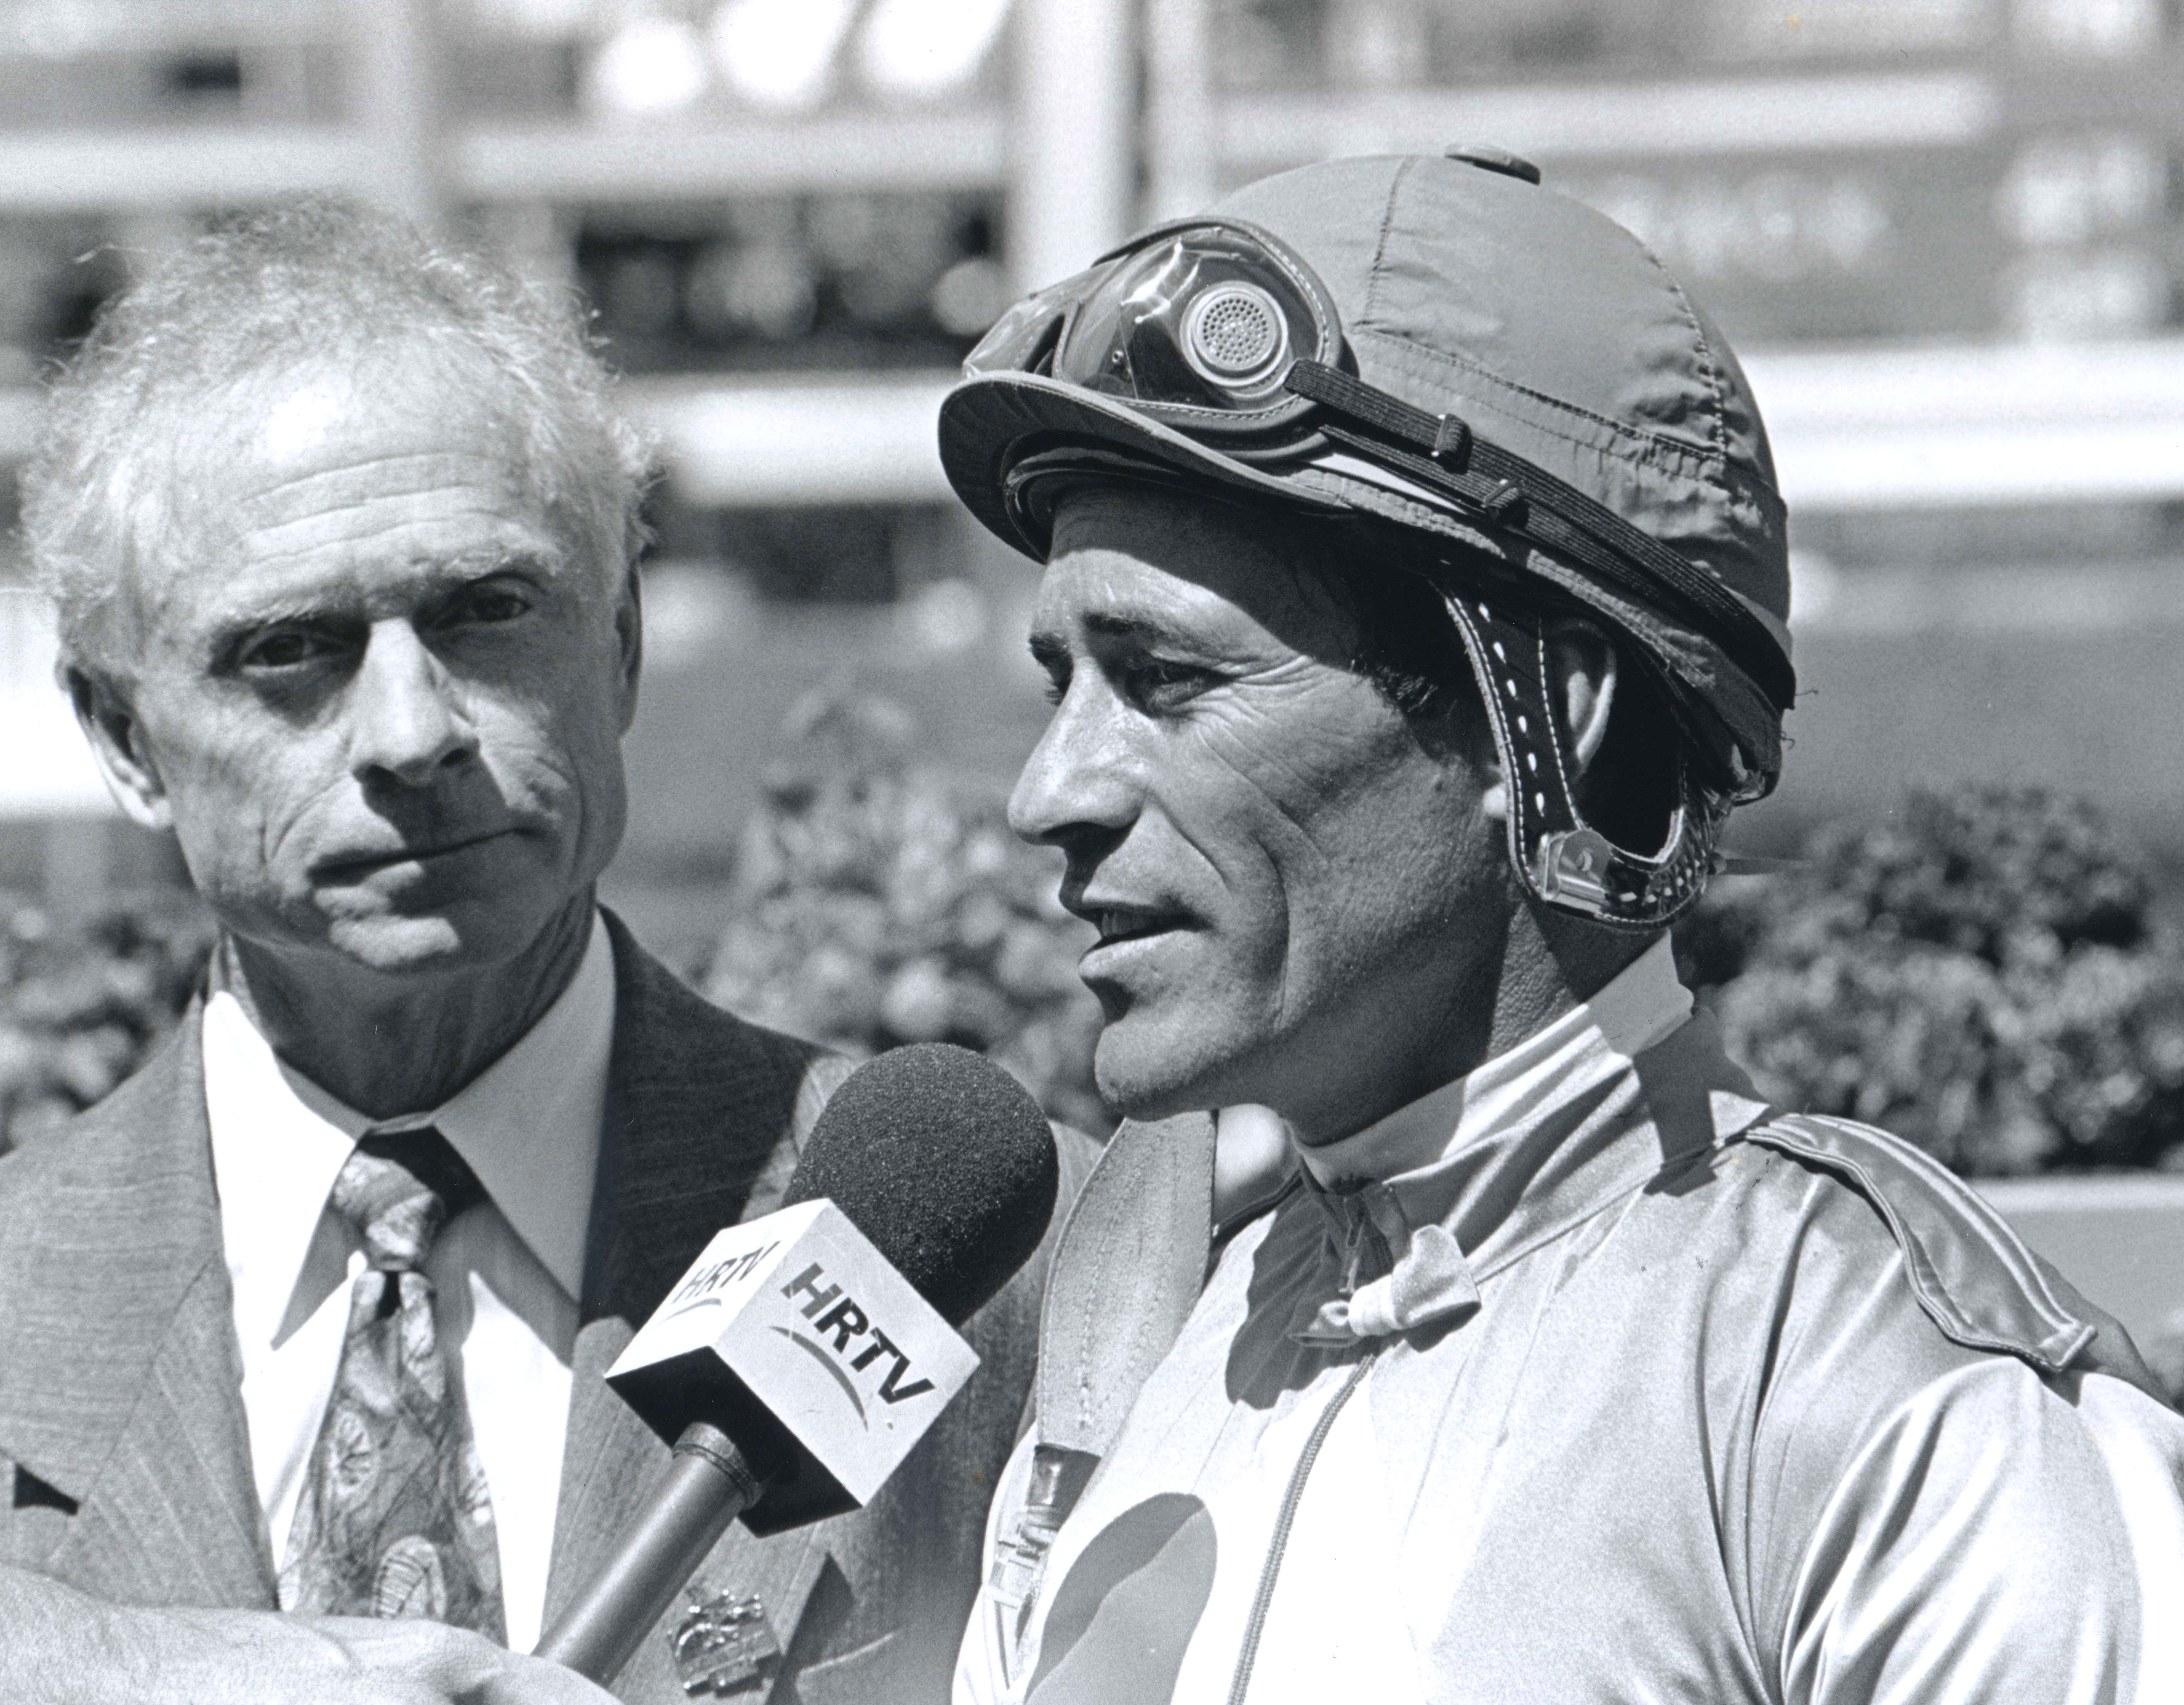 Gary Steven expresses gratitude for tribute in the winners circle celebration on his record nine wins of the Santa Anita Derby, April 19, 2003 (Bill Mochon/Museum Collection)